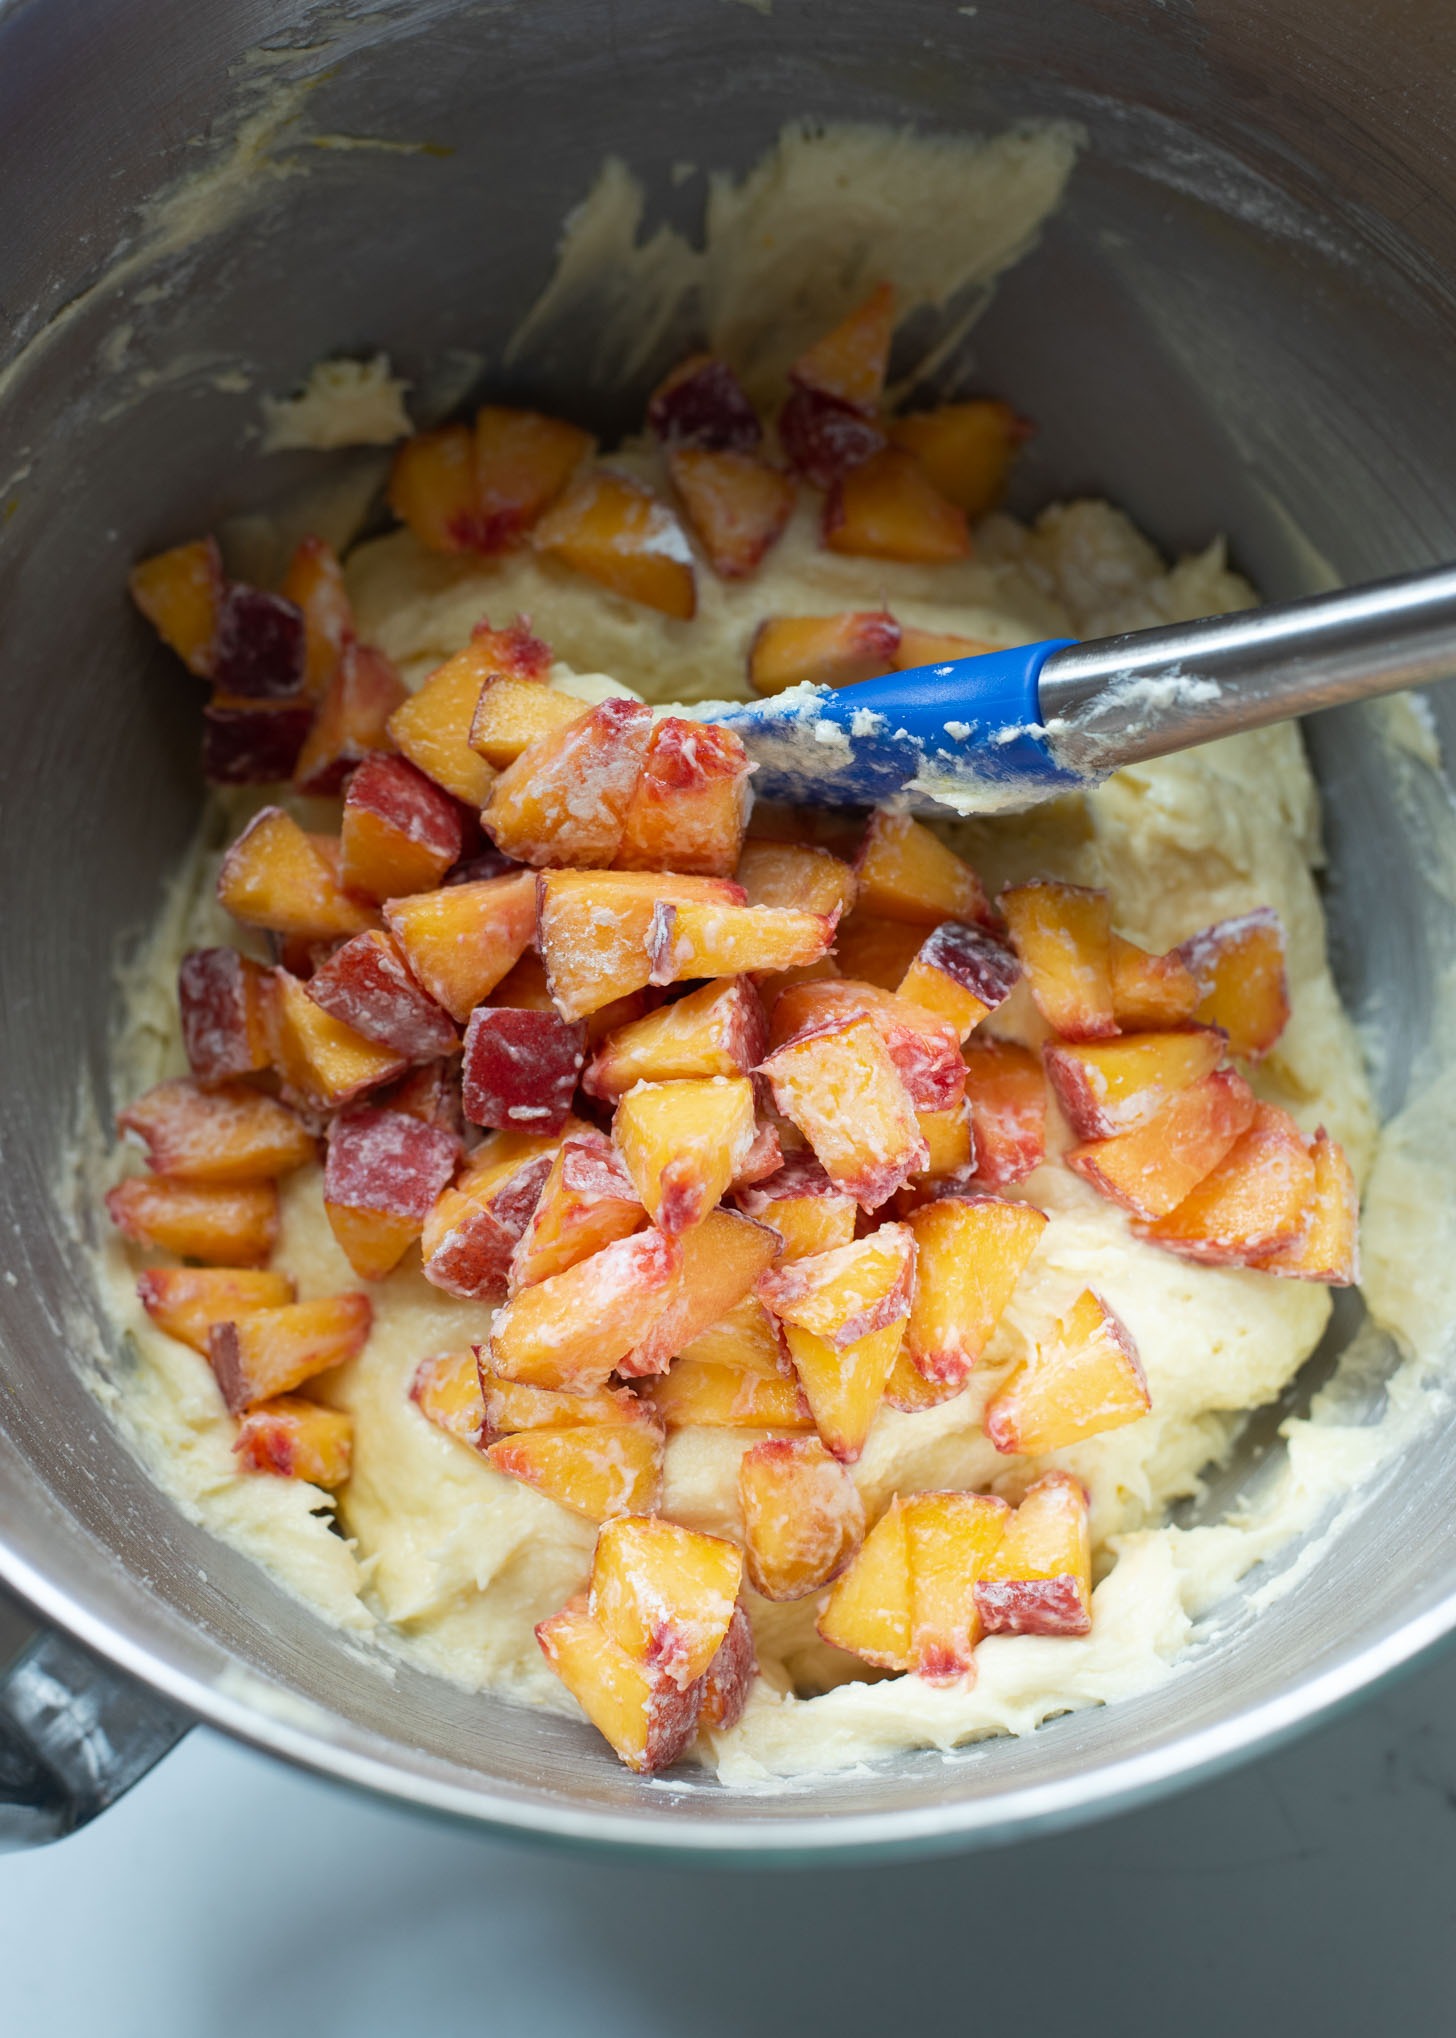 Diced peach slices coated with flour are added to peach pound cake batter in a mixer.